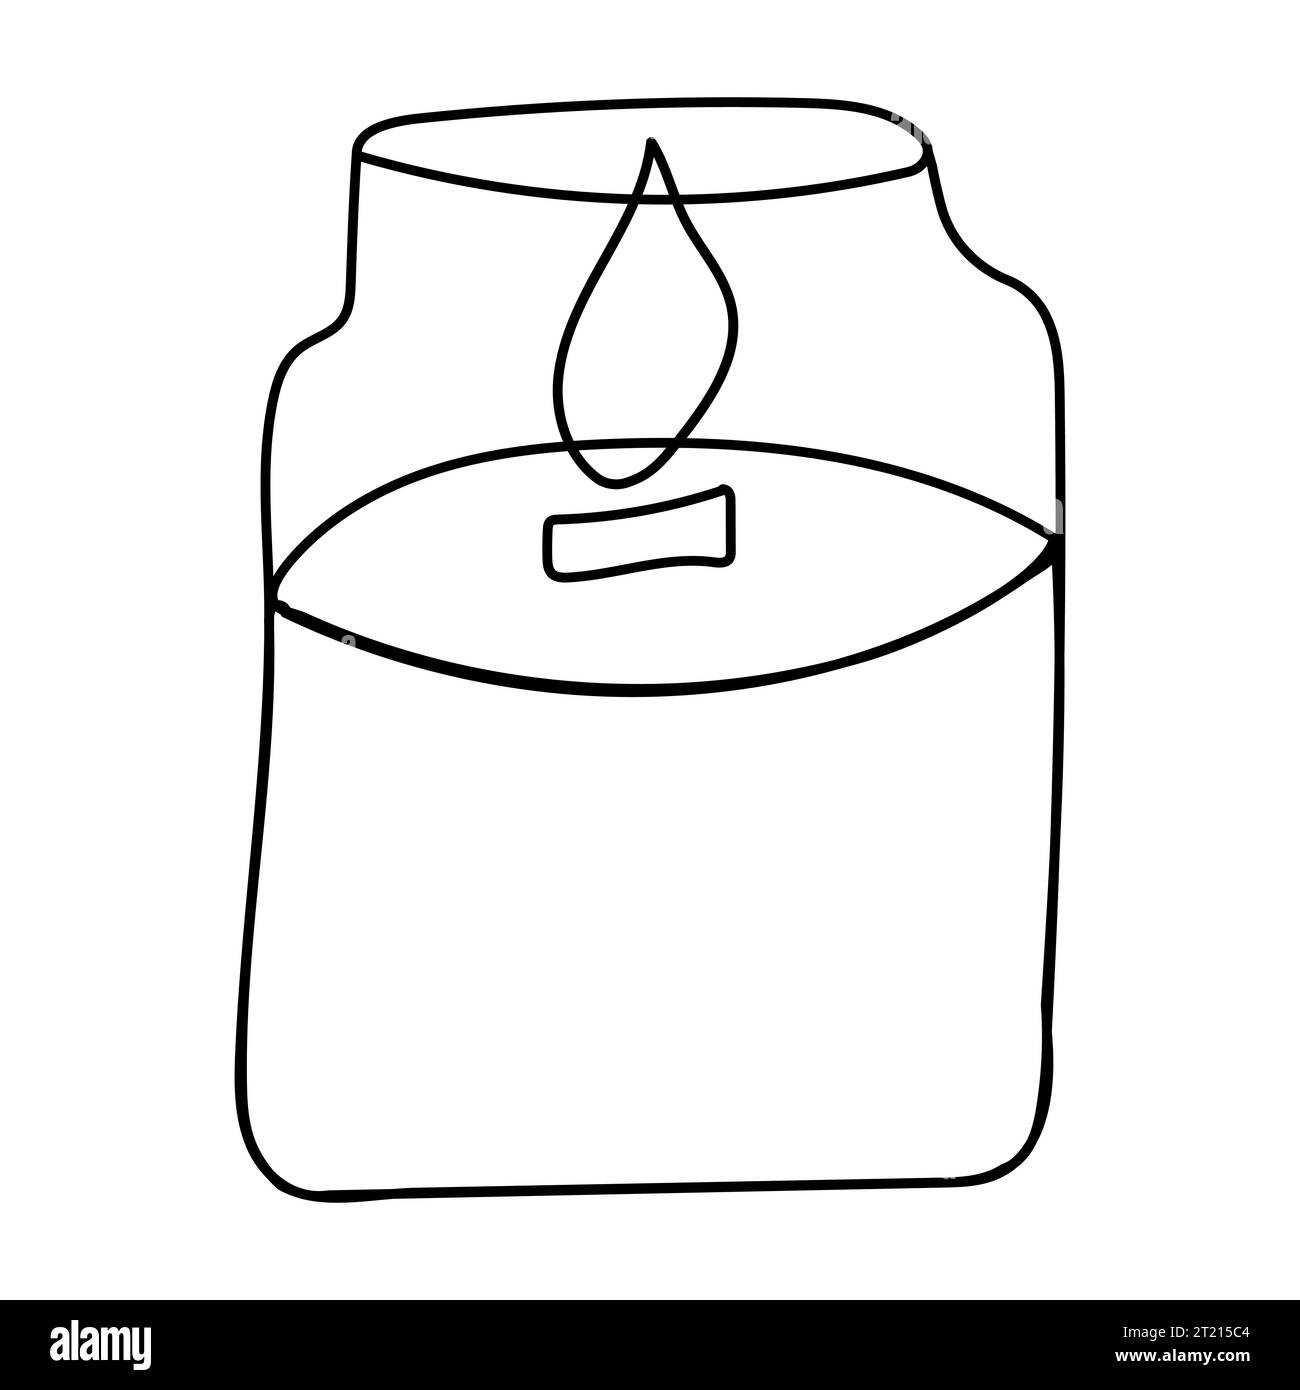 candle house comfort flame fire line doodle Stock Vector